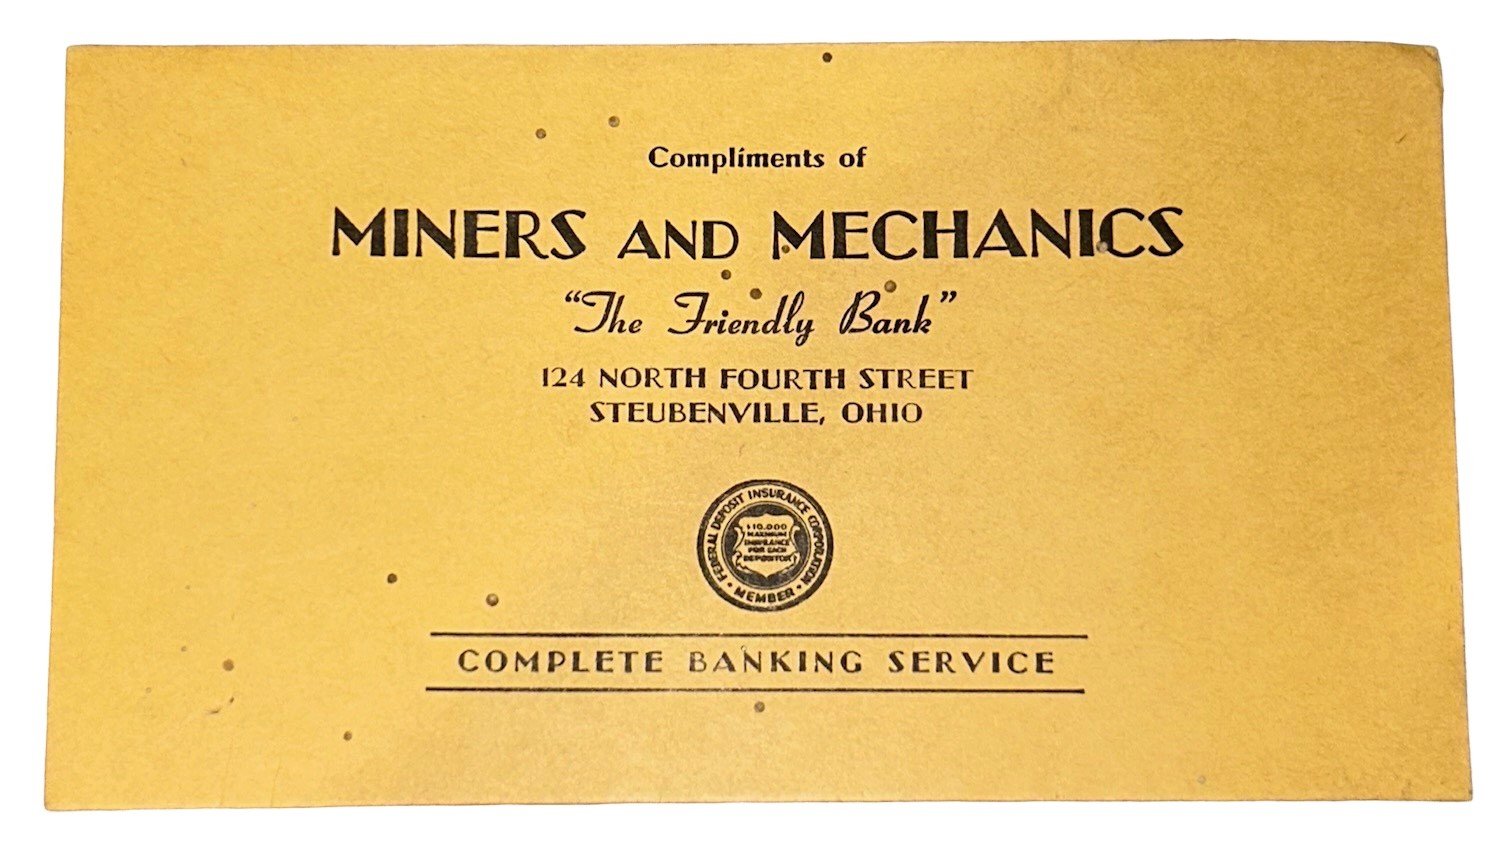 Miners and Mechanics Bank and Steubenville Calendar Envelope Check Deposit Book